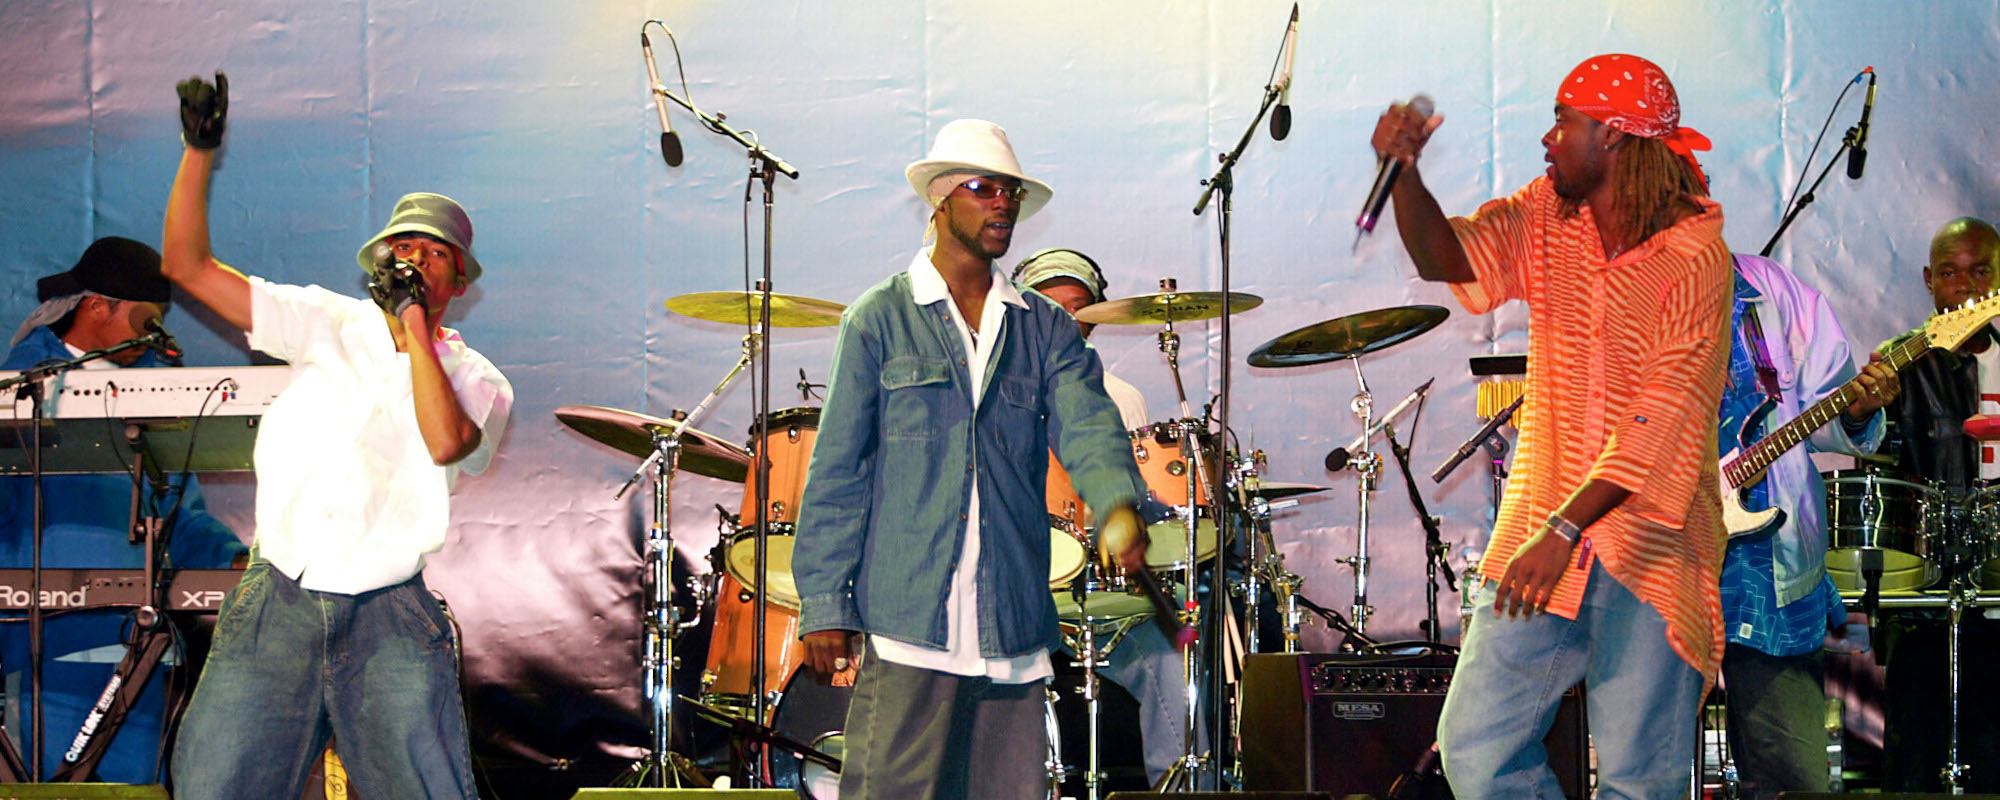 The Baha Men, the band who famously sings "Who Let the Dogs Out," is pictured performing live.